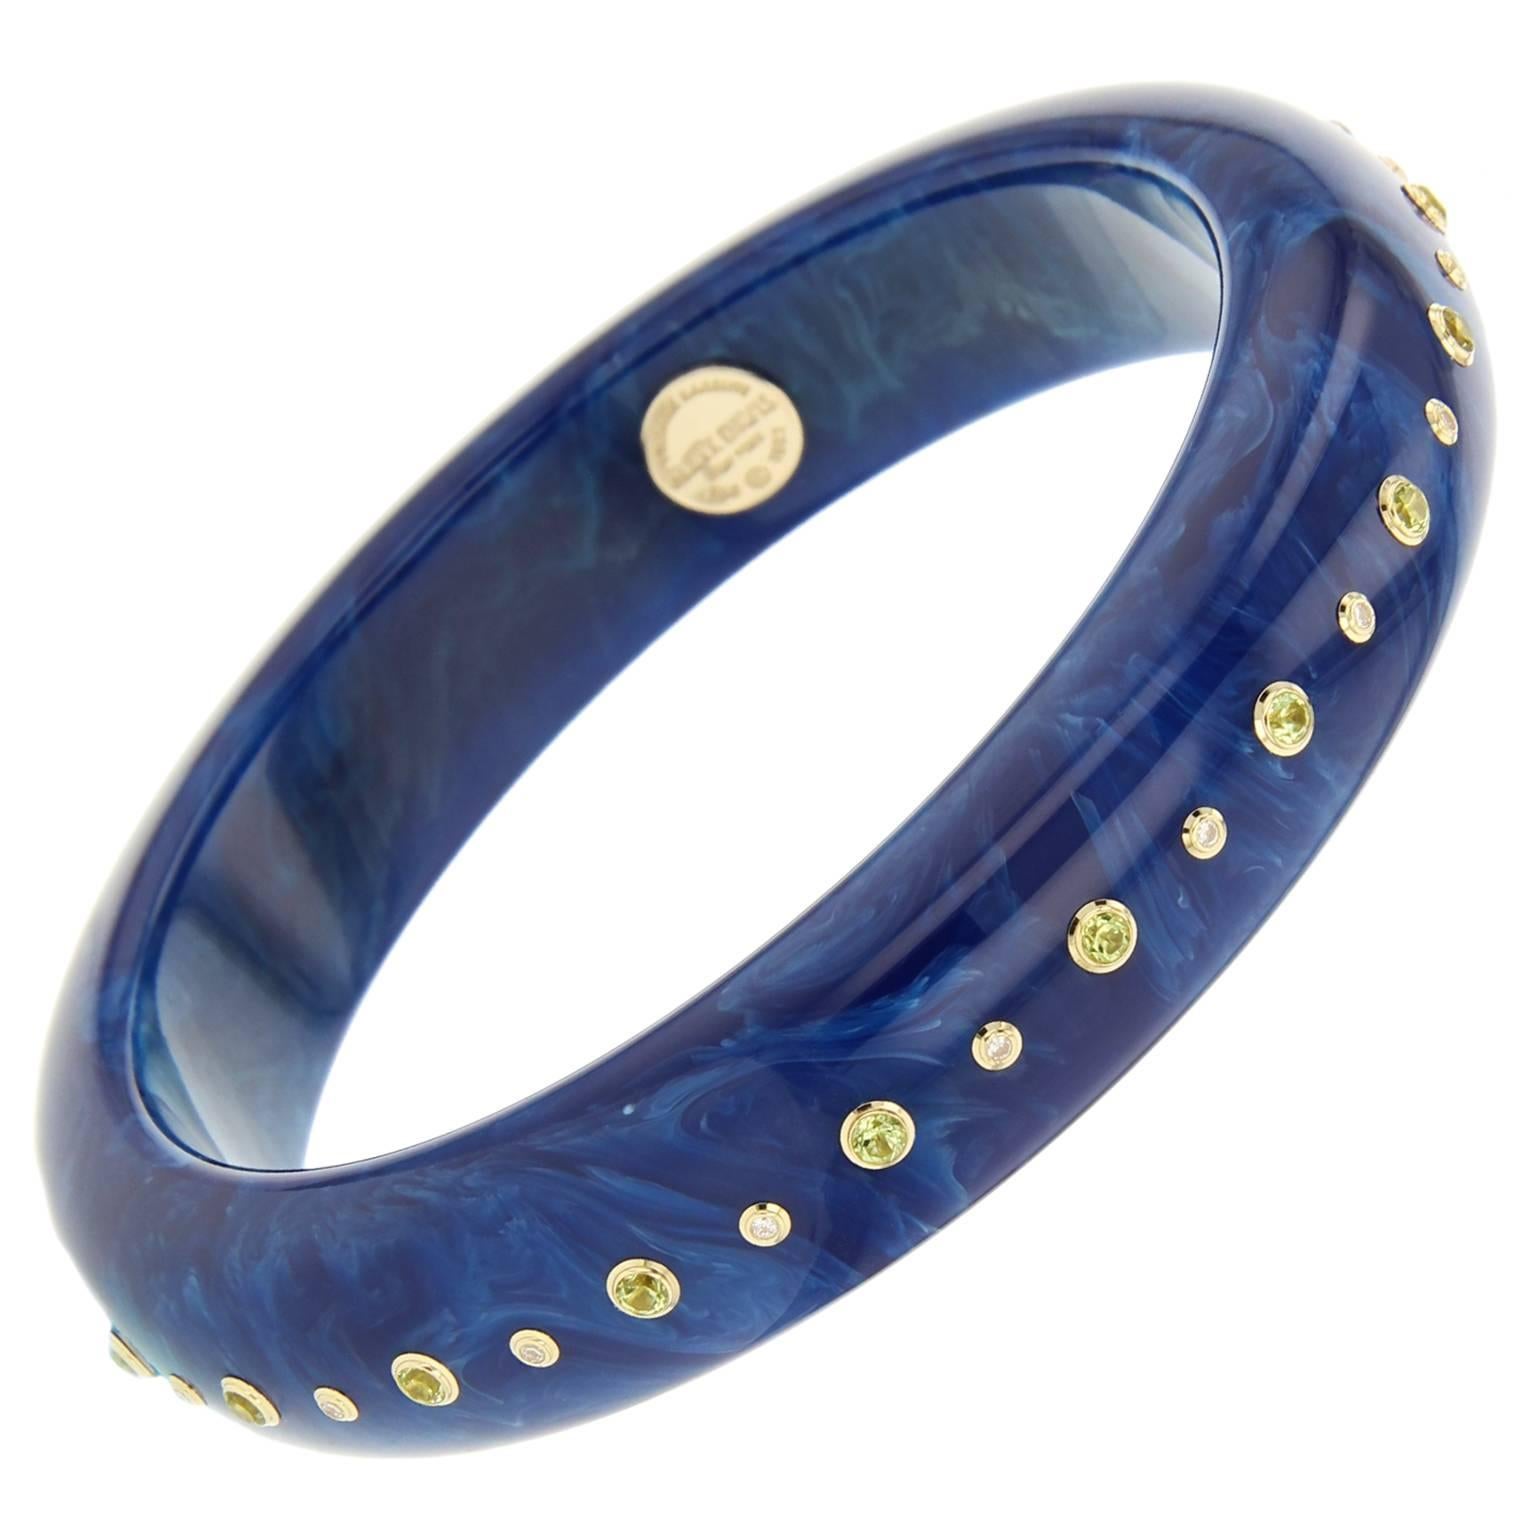 This chic Mark Davis bangle was handcrafted using marbled blue vintage bakelite and studded with peridot and fine diamonds, bezel-set in 18k yellow gold.    

Full details below: 
• From the Mark Davis Bakelite Collection 
• Vintage marbled blue